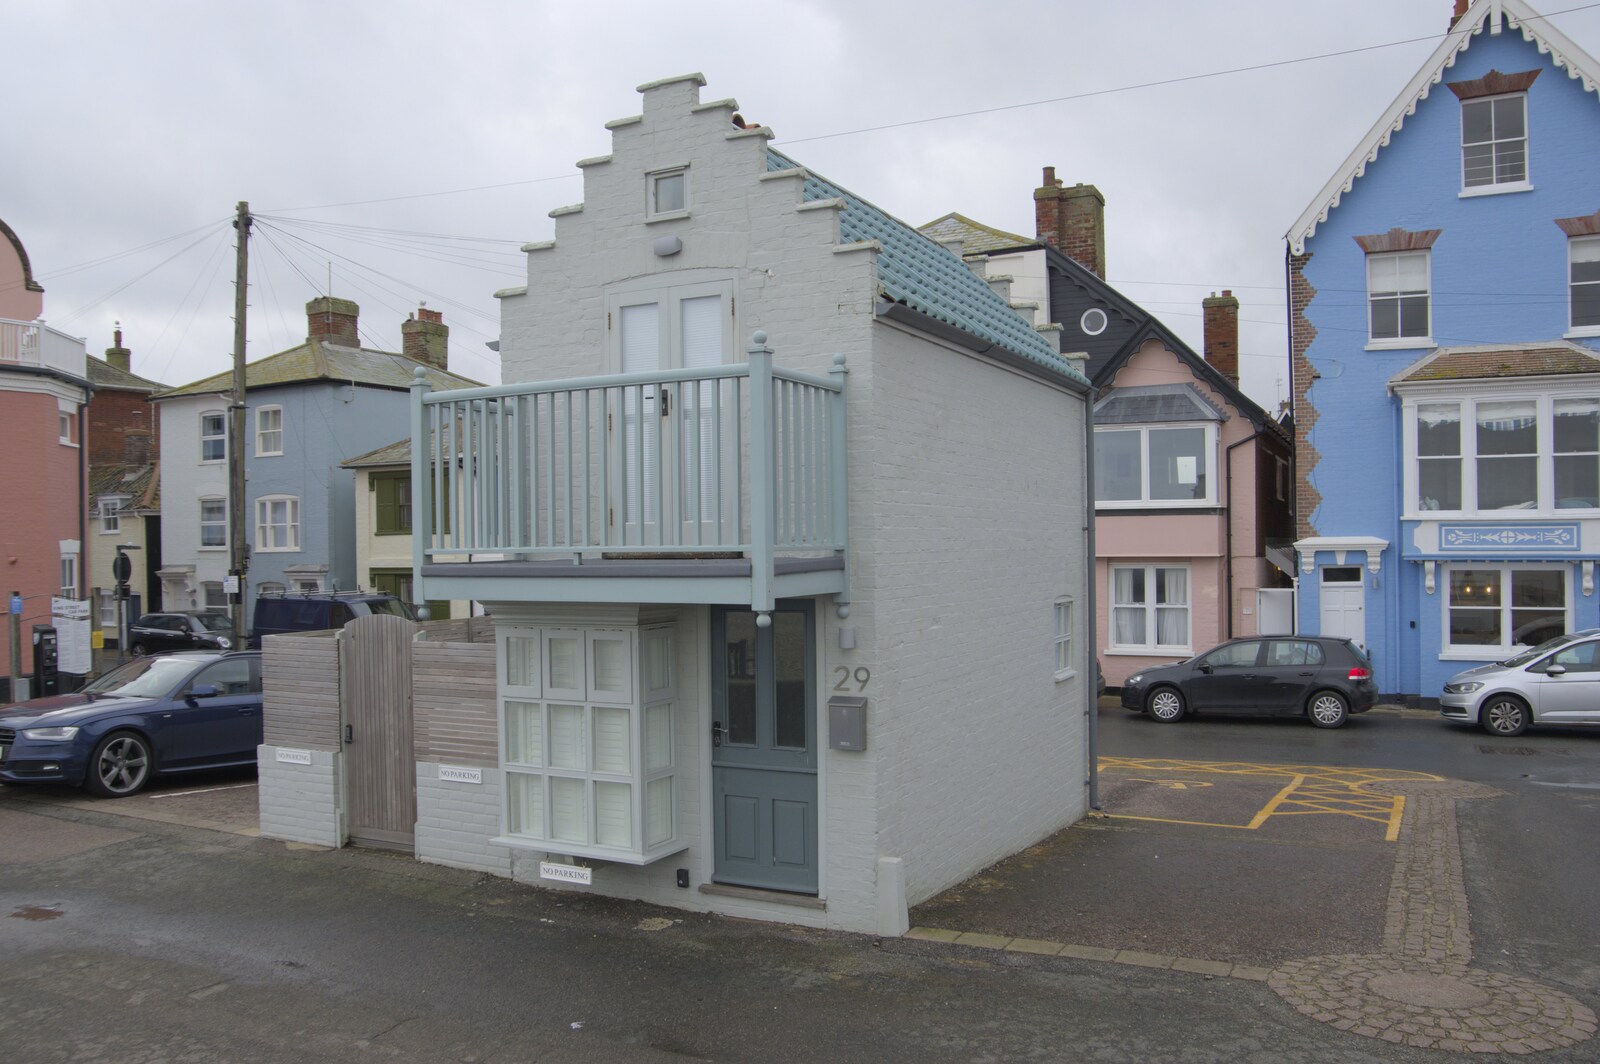 A curious tiny house on King Street from Framlingham, Aldeburgh and the USAAF Heritage Trust, Hoxne, Suffolk - 14th February 2024 